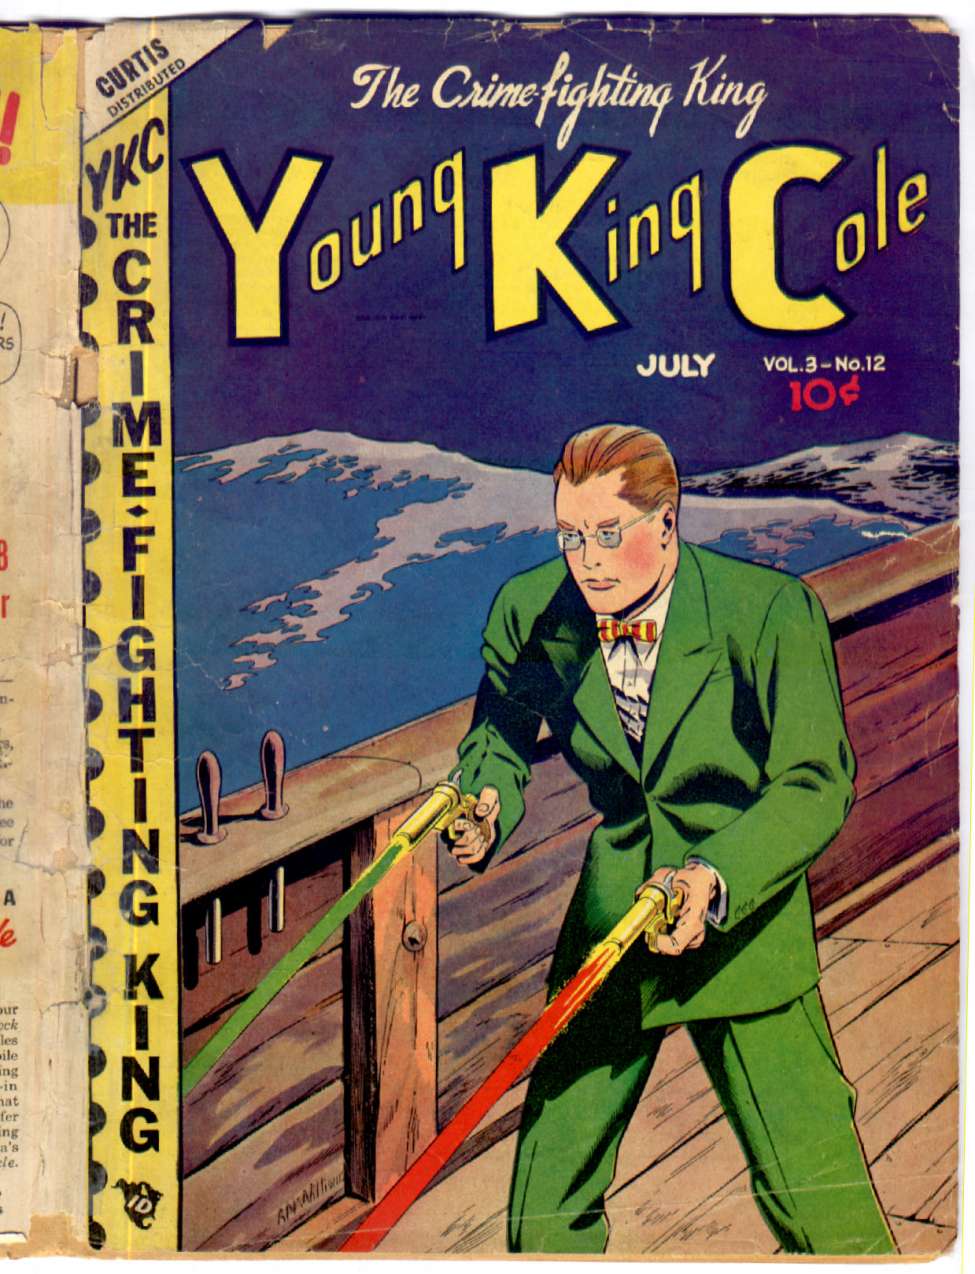 Comic Book Cover For Young King Cole v3 12